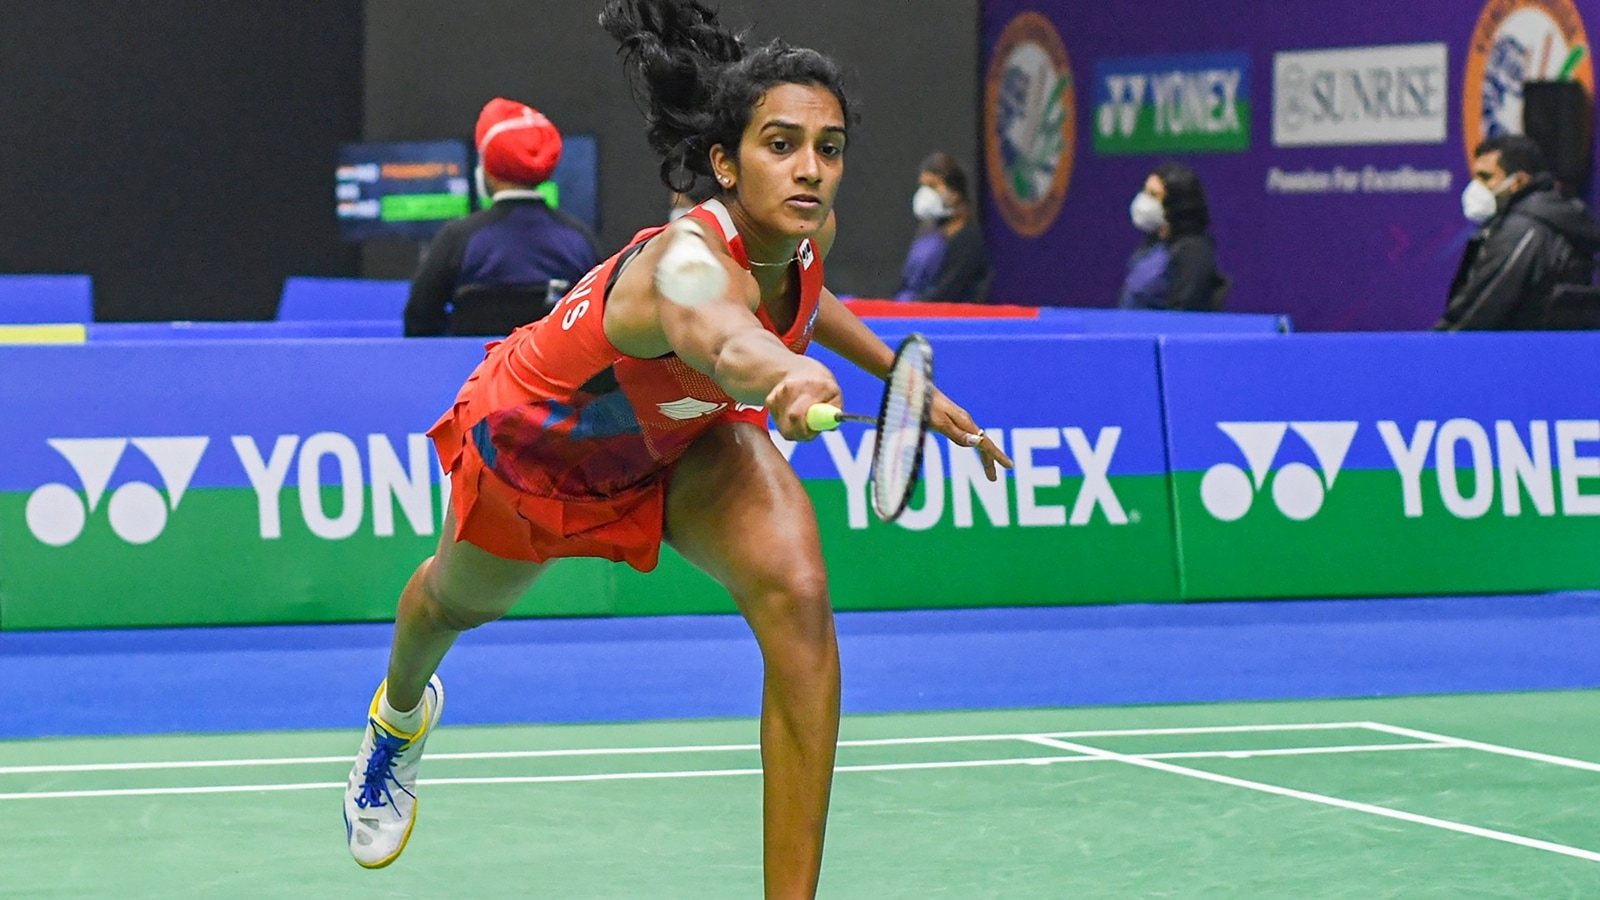 Swiss Open PV Sindhu, Srikanth look to find top form; Lakhsya Sen opts out 